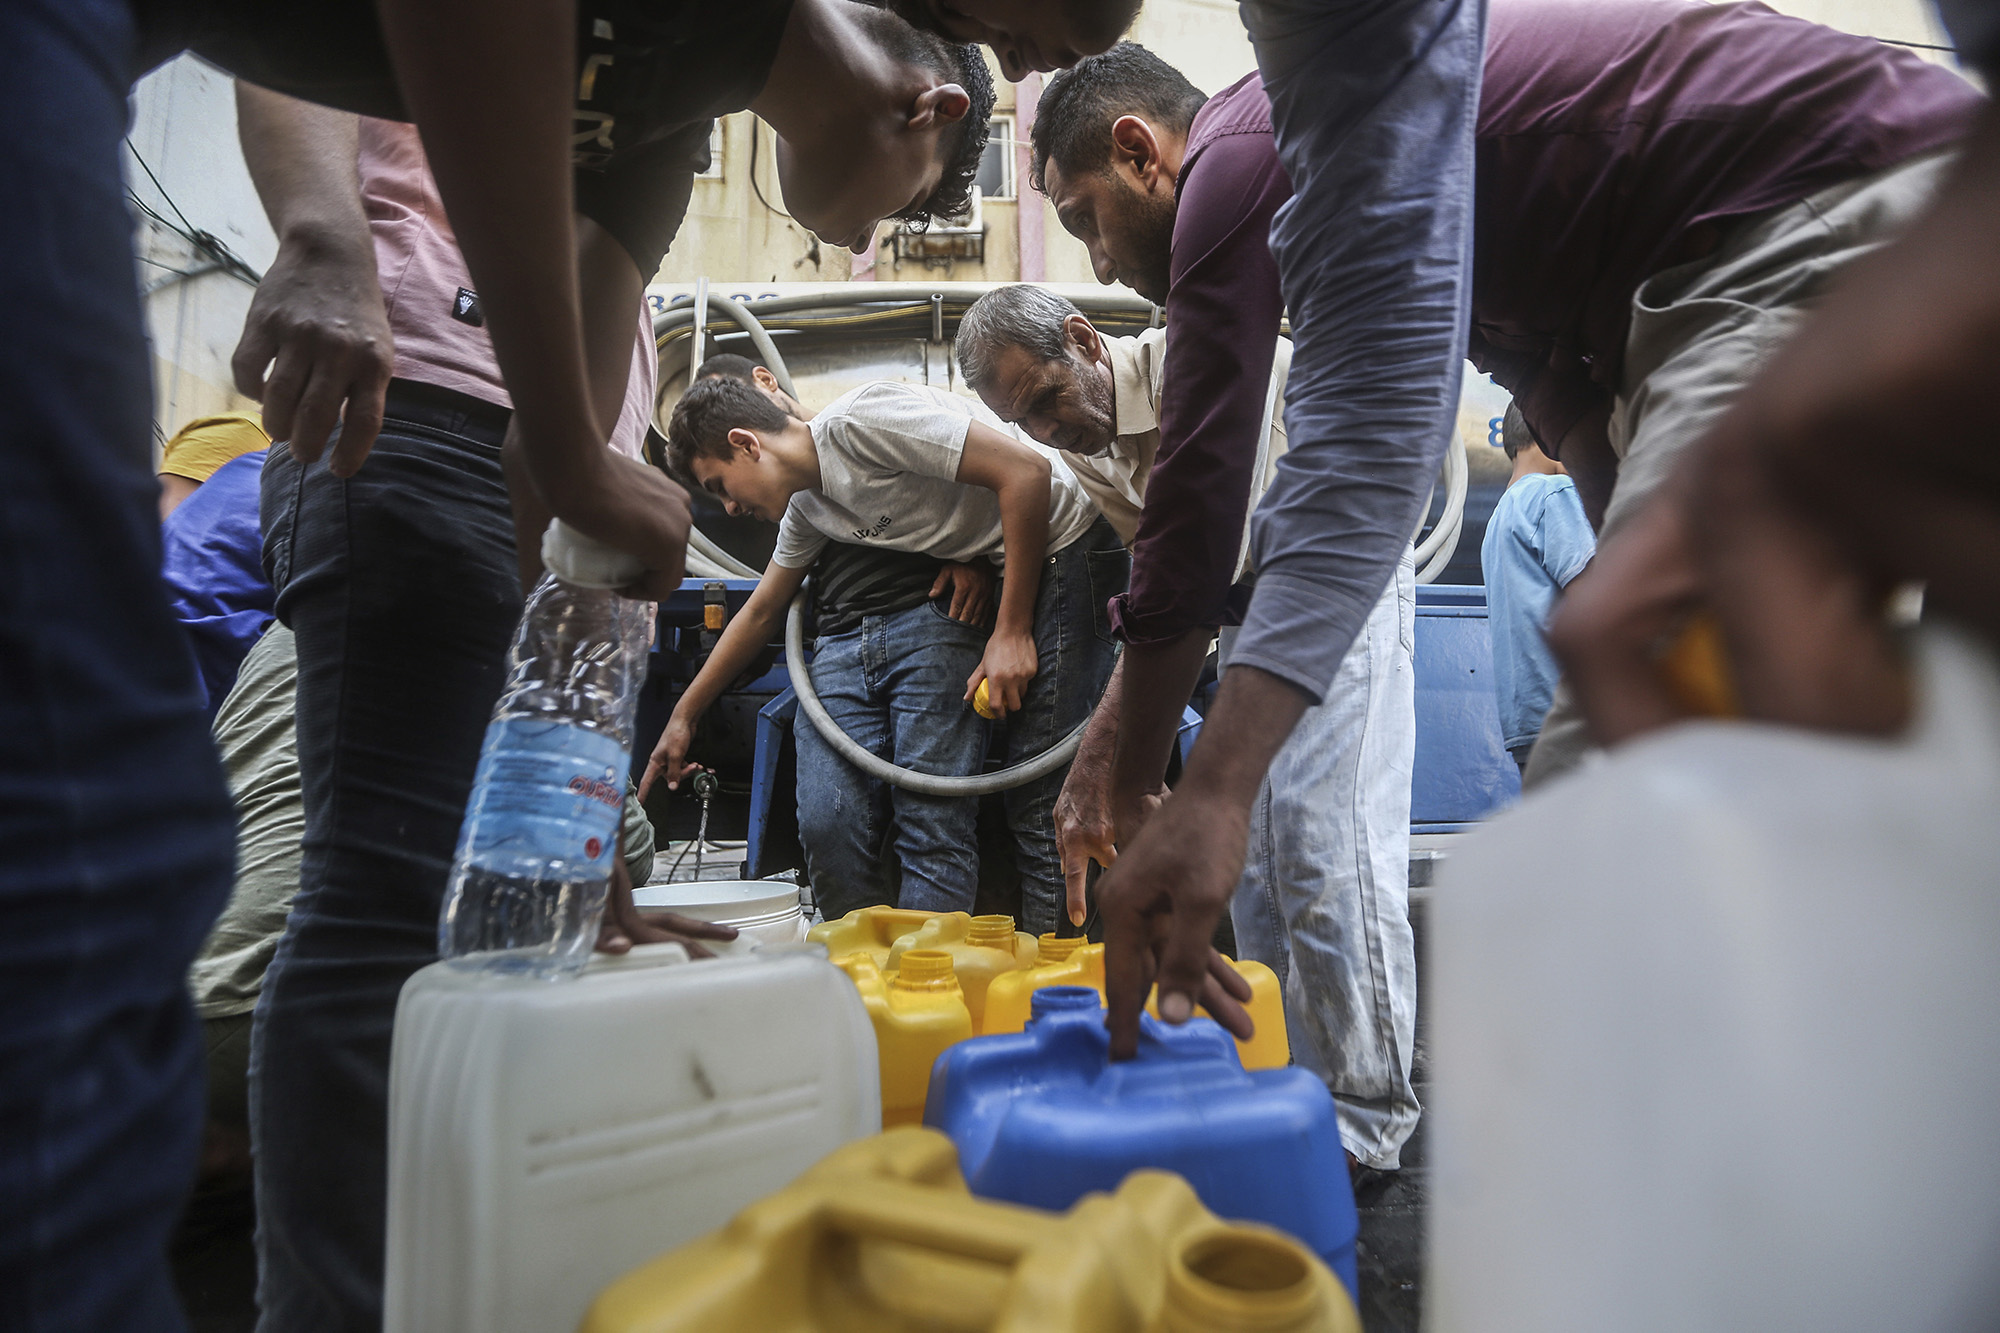 Palestinians fill containers with drinking water from a water distribution vehicle in Gaza City, Gaza, on October 12.